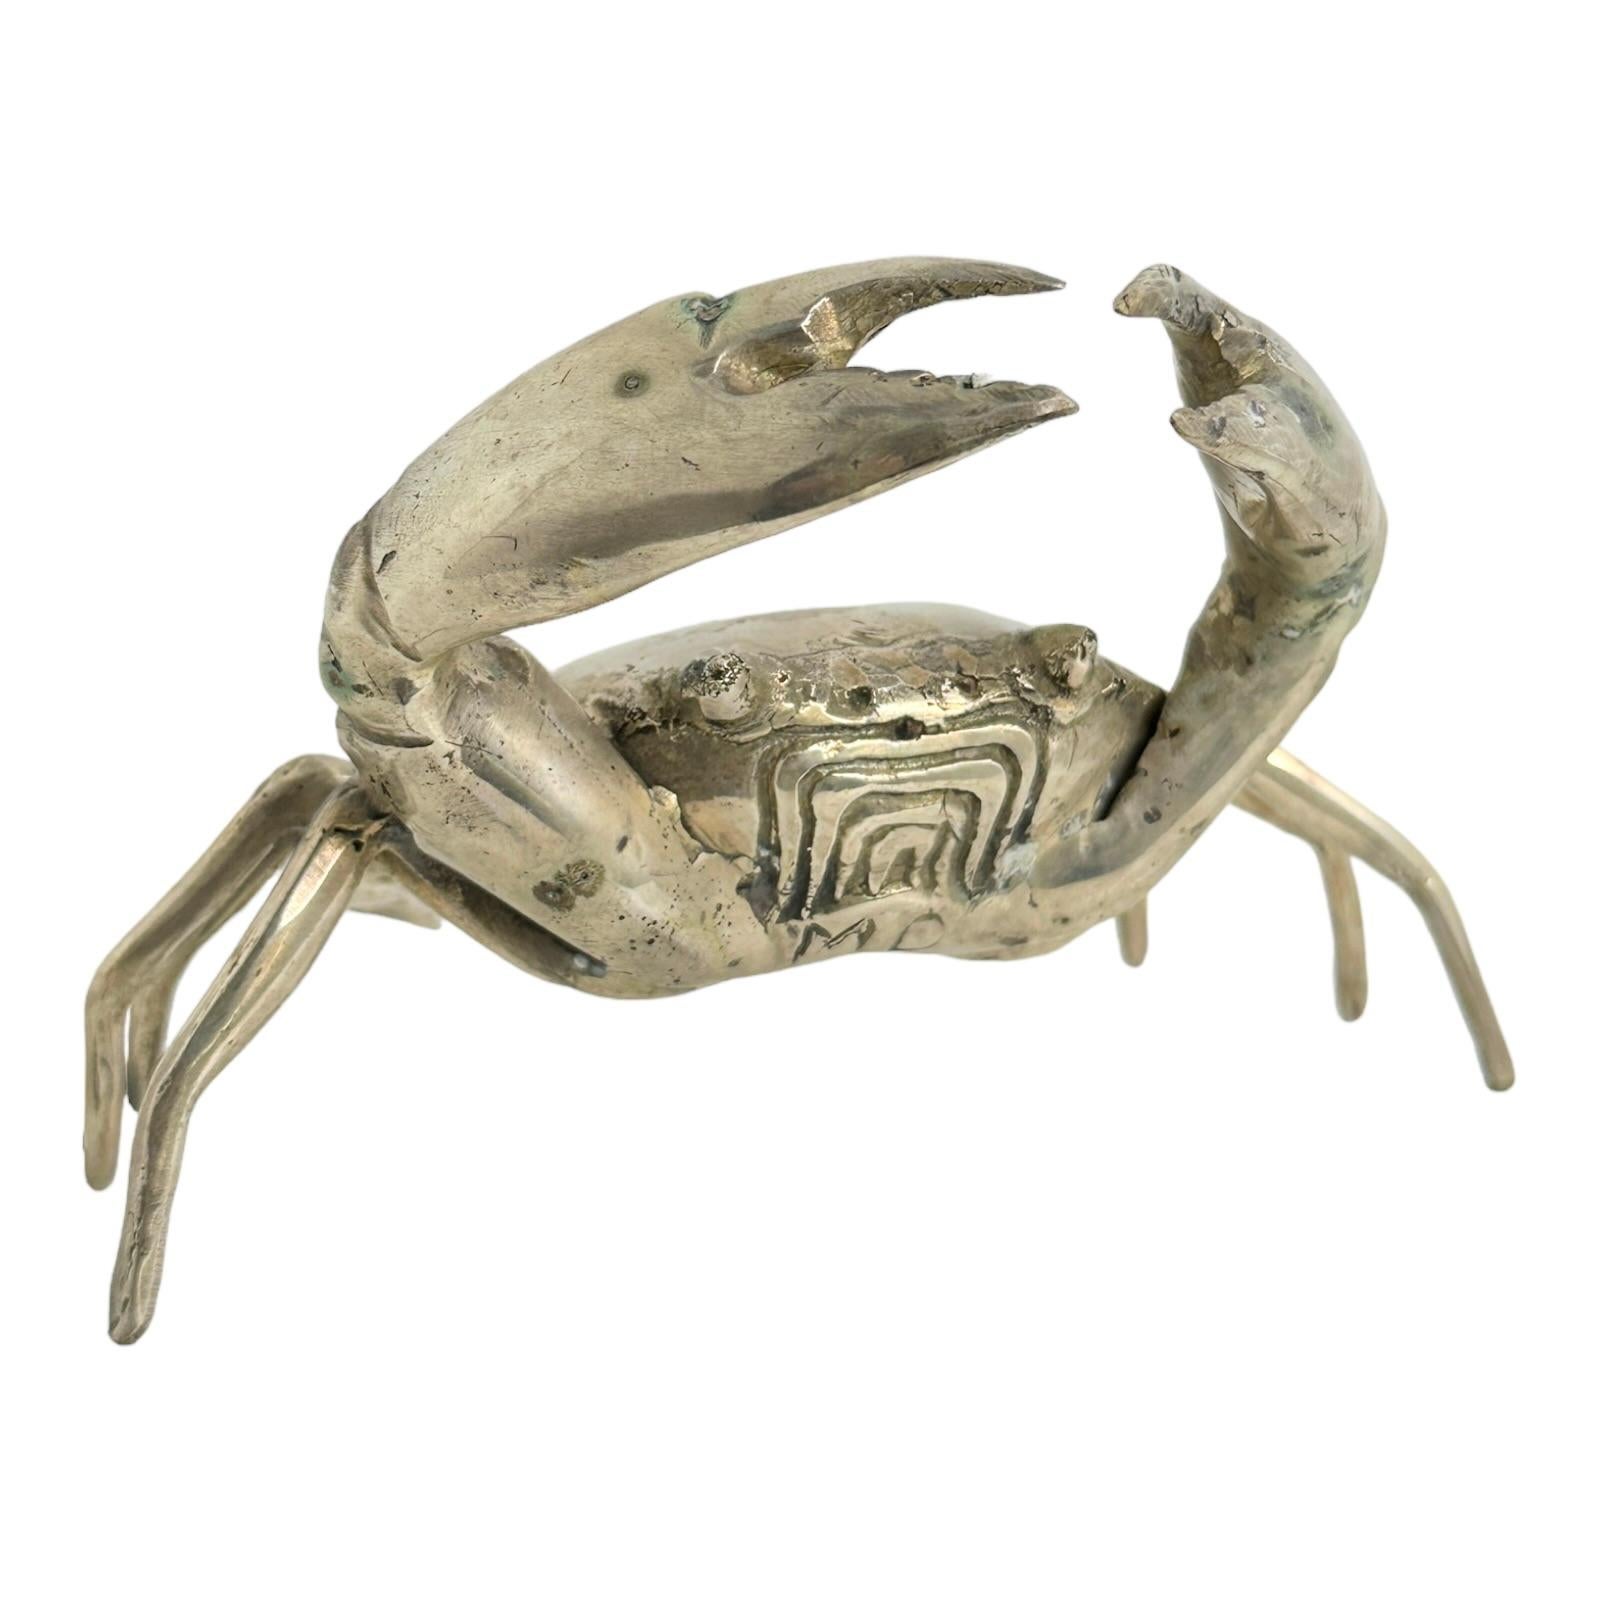 This nickel plated metal crab statue was most likely made in the 1980s in Italy. Can not tell the maker or the artist and it is not signed. This particular crab statue is a beautiful piece, it can be displayed as a sculptural focal point on a